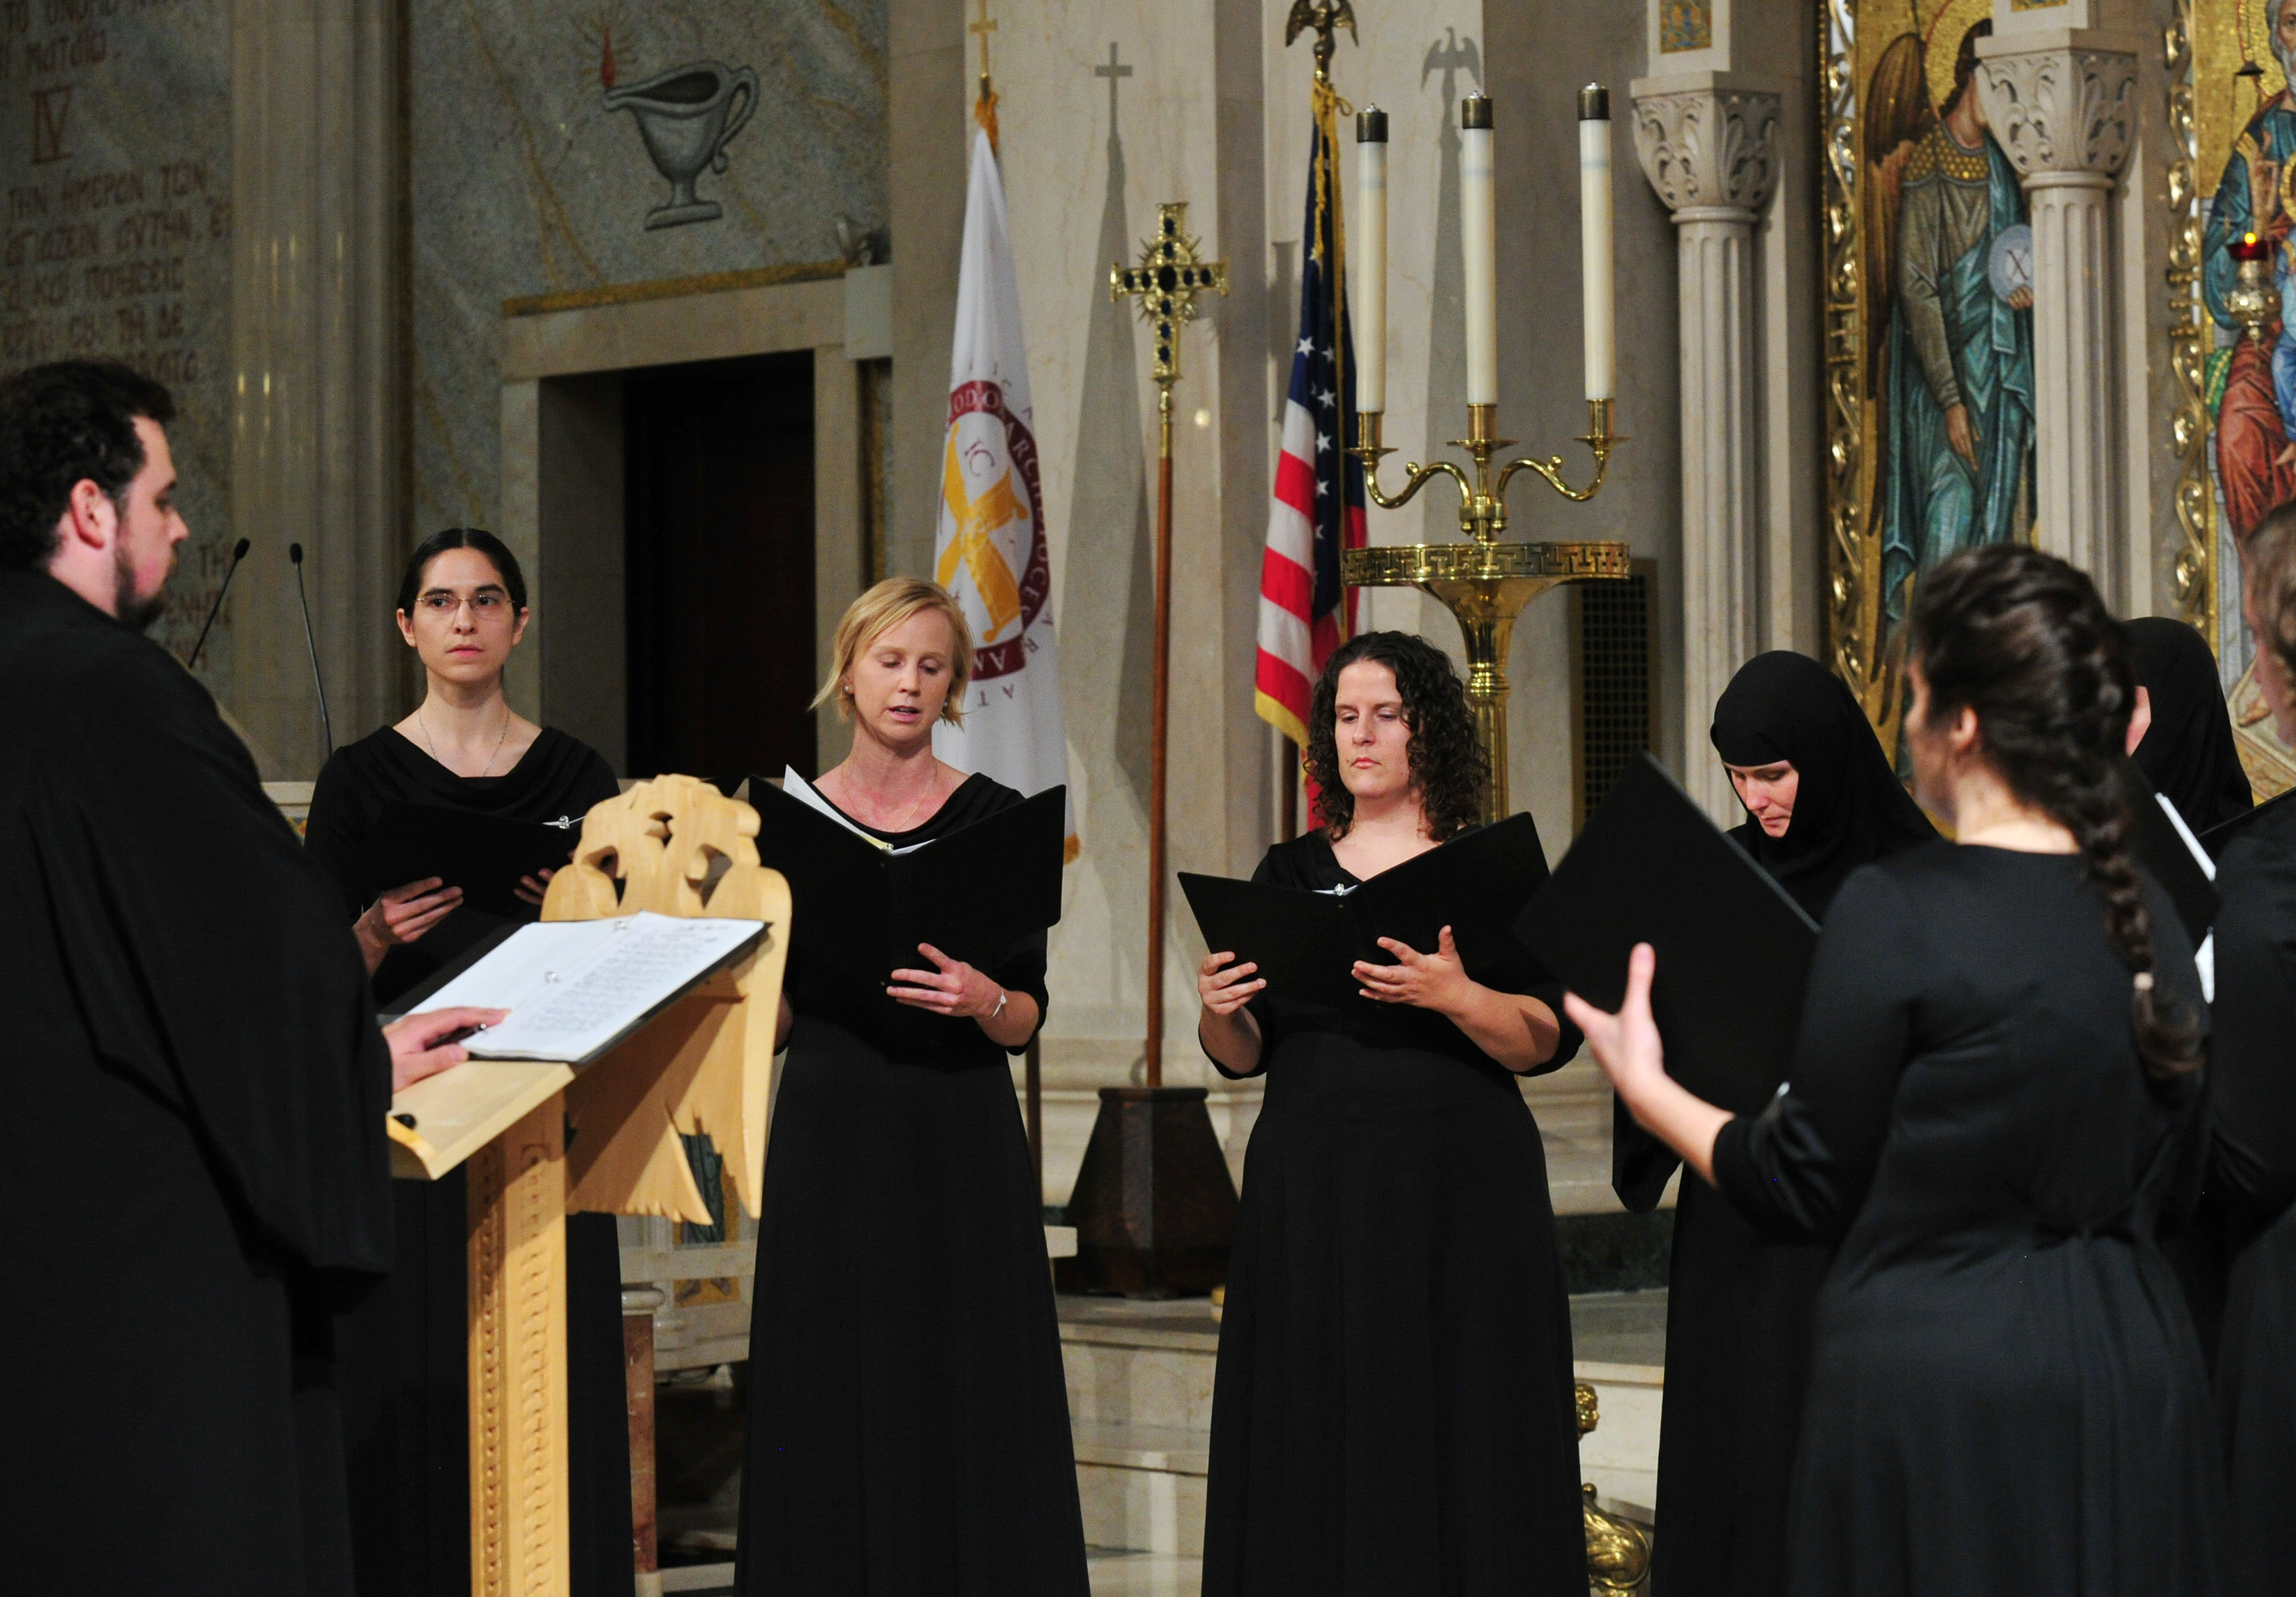 The Archdiocesan Byzantine Choir,and St. Kassiani Choir Concert at The Holy trinity Cathedral in NY. PHOTO:© DIMITRIOS PANAGOS-GANP/ΔΗΜΗΤΡΗΣ ΠΑΝΑΓΟΣ